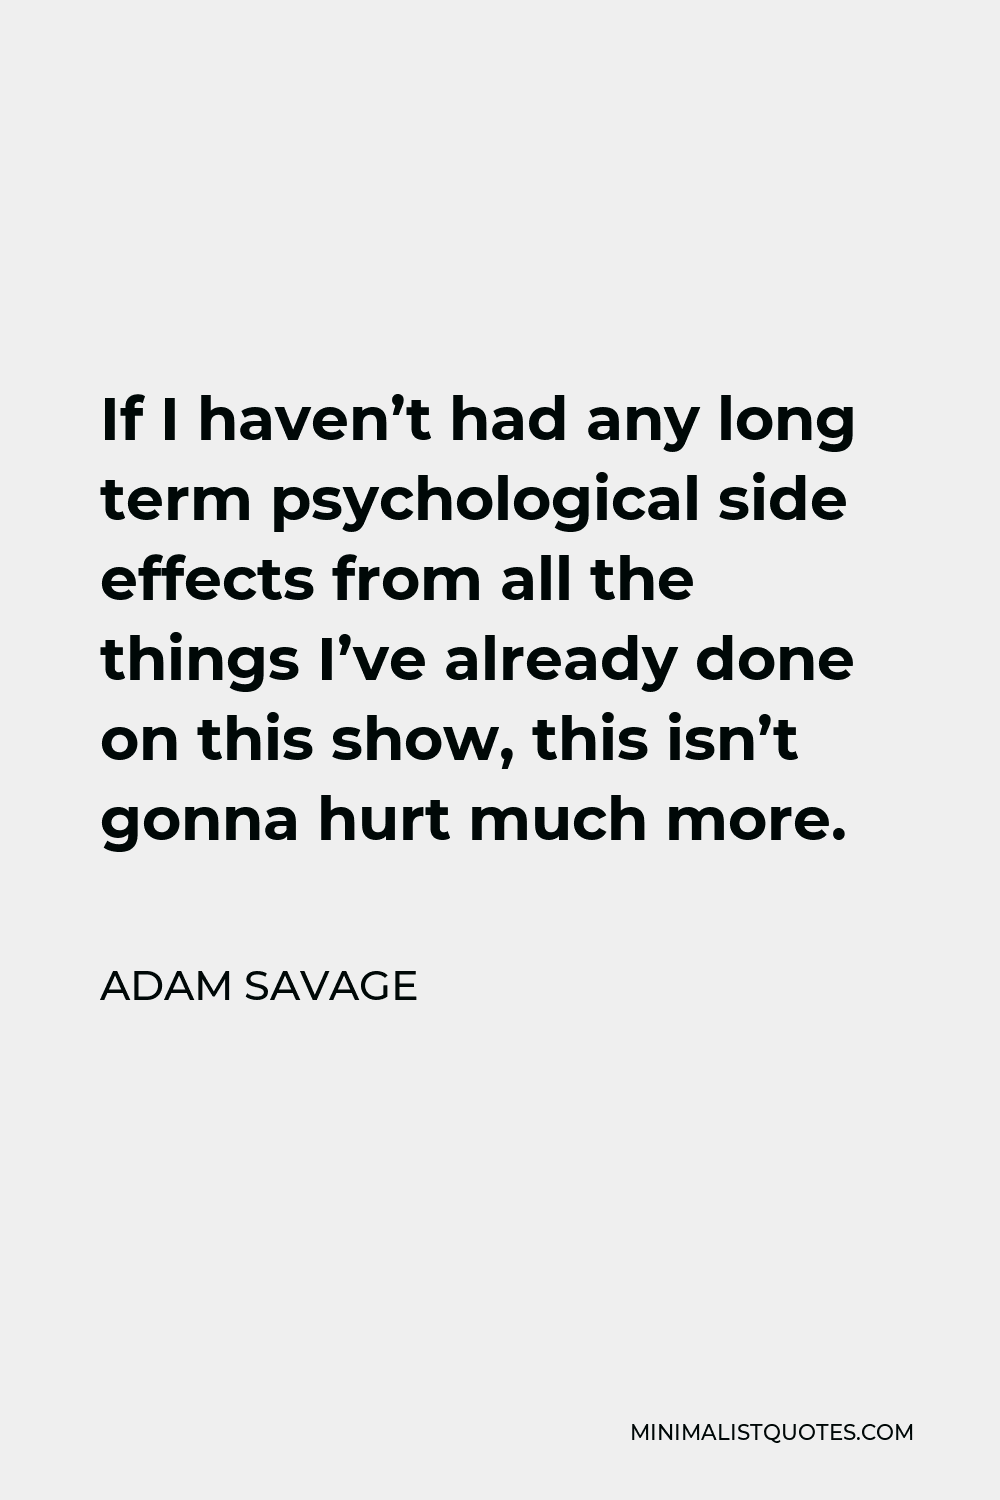 Adam Savage Quote - If I haven’t had any long term psychological side effects from all the things I’ve already done on this show, this isn’t gonna hurt much more.